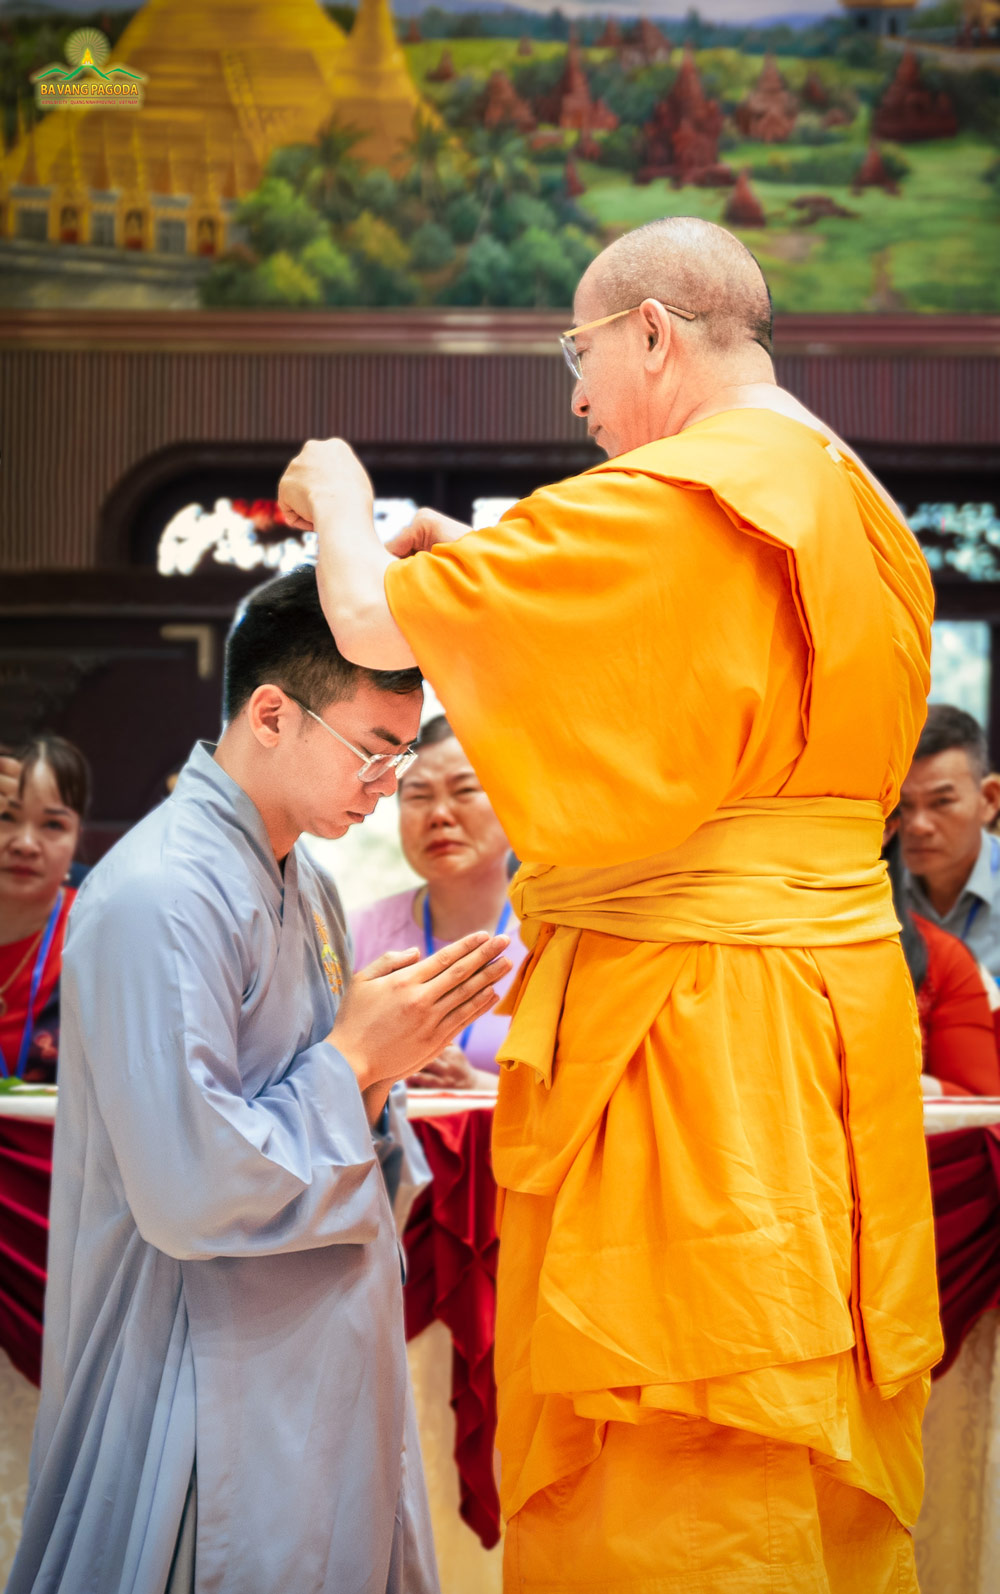 “Dear Thay, I hope you will accept my request to ordain me, letting me take my first steps into the holy linage and the path that all Buddhas have walked,” a sincere request of an aspirant to Thay